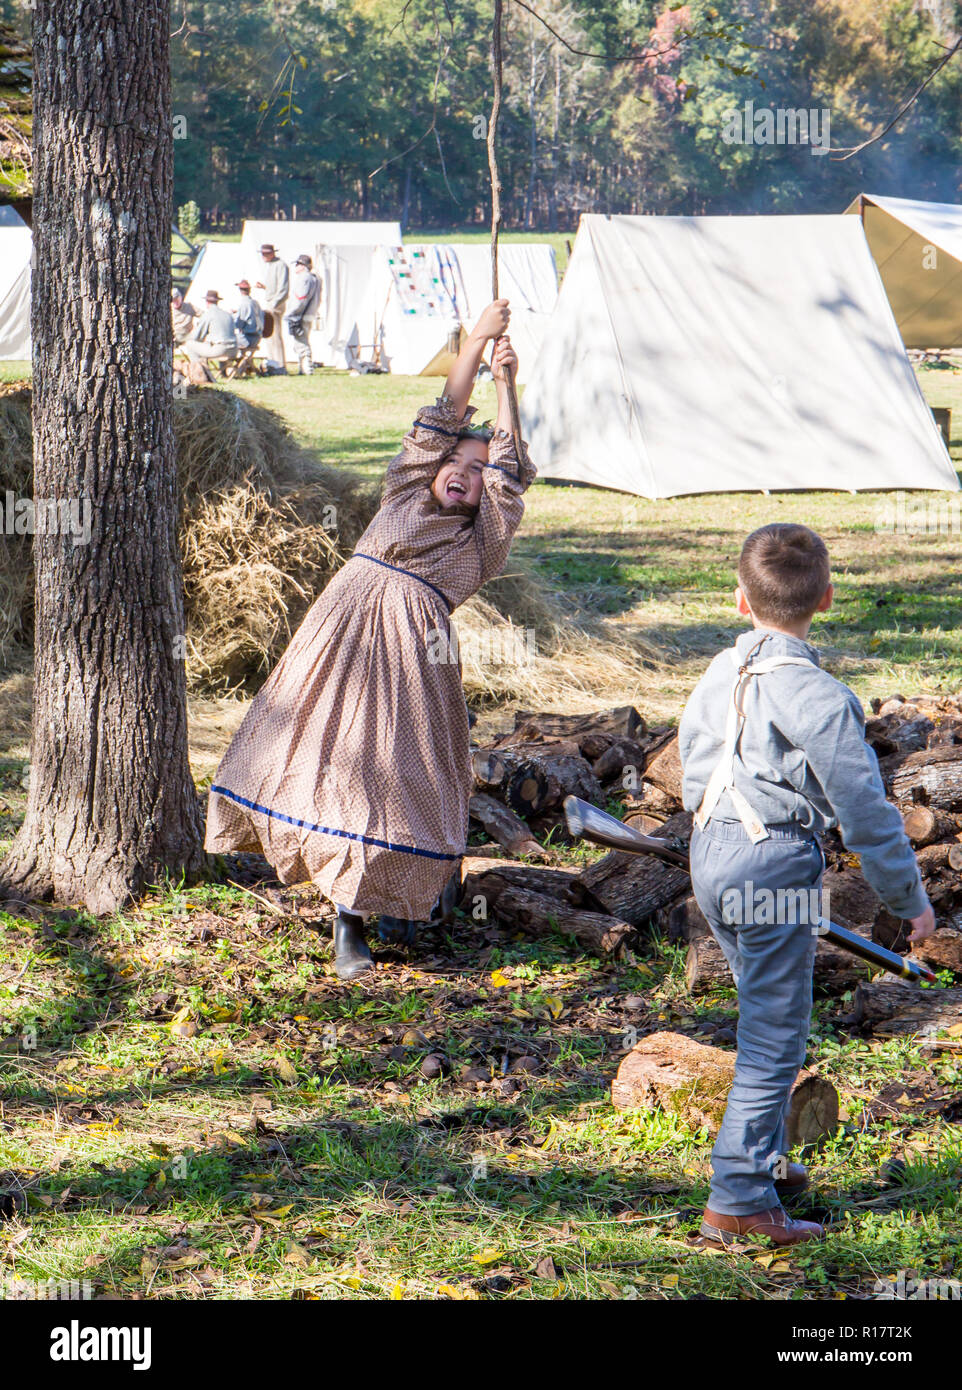 MCCONNELLS, SC (USA) - November 3, 2018:  Children in period dress play during a reenactment of the American Civil War at Historic Brattonsville. Stock Photo